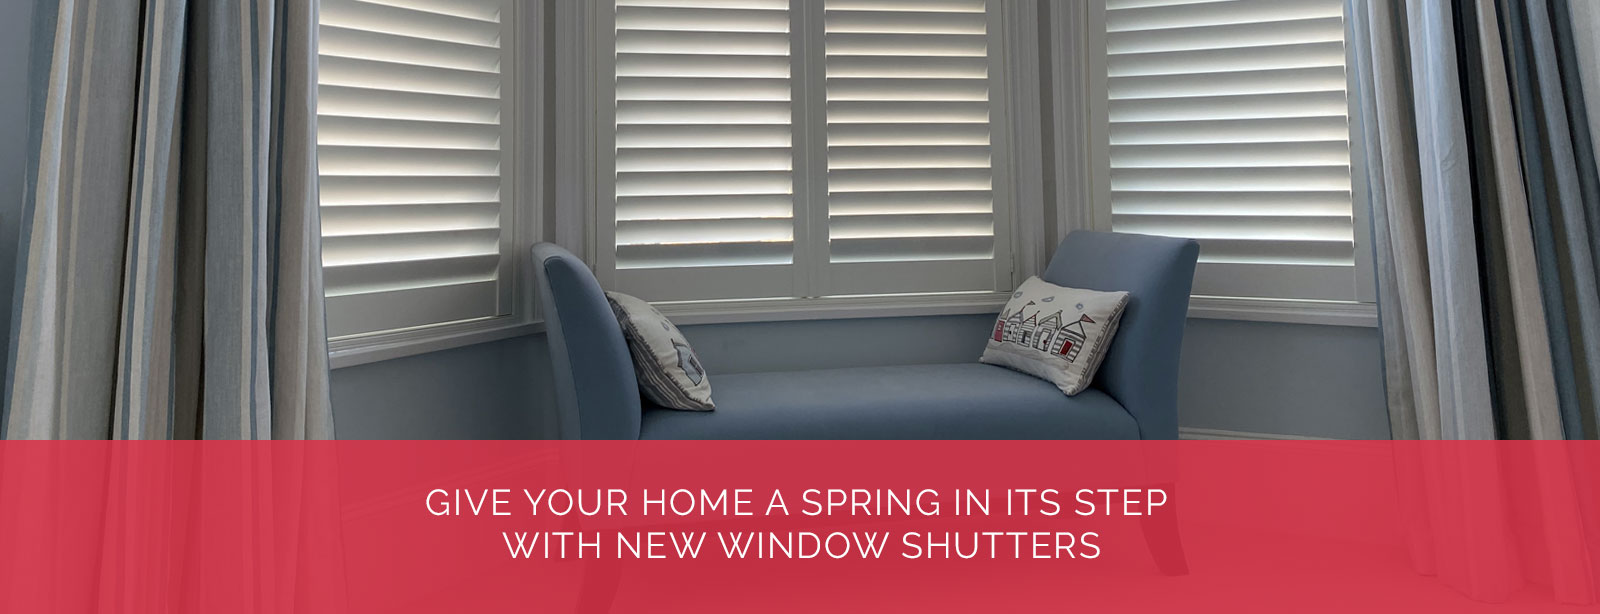 Give Your Home a Spring In Its Step With New Window Shutters